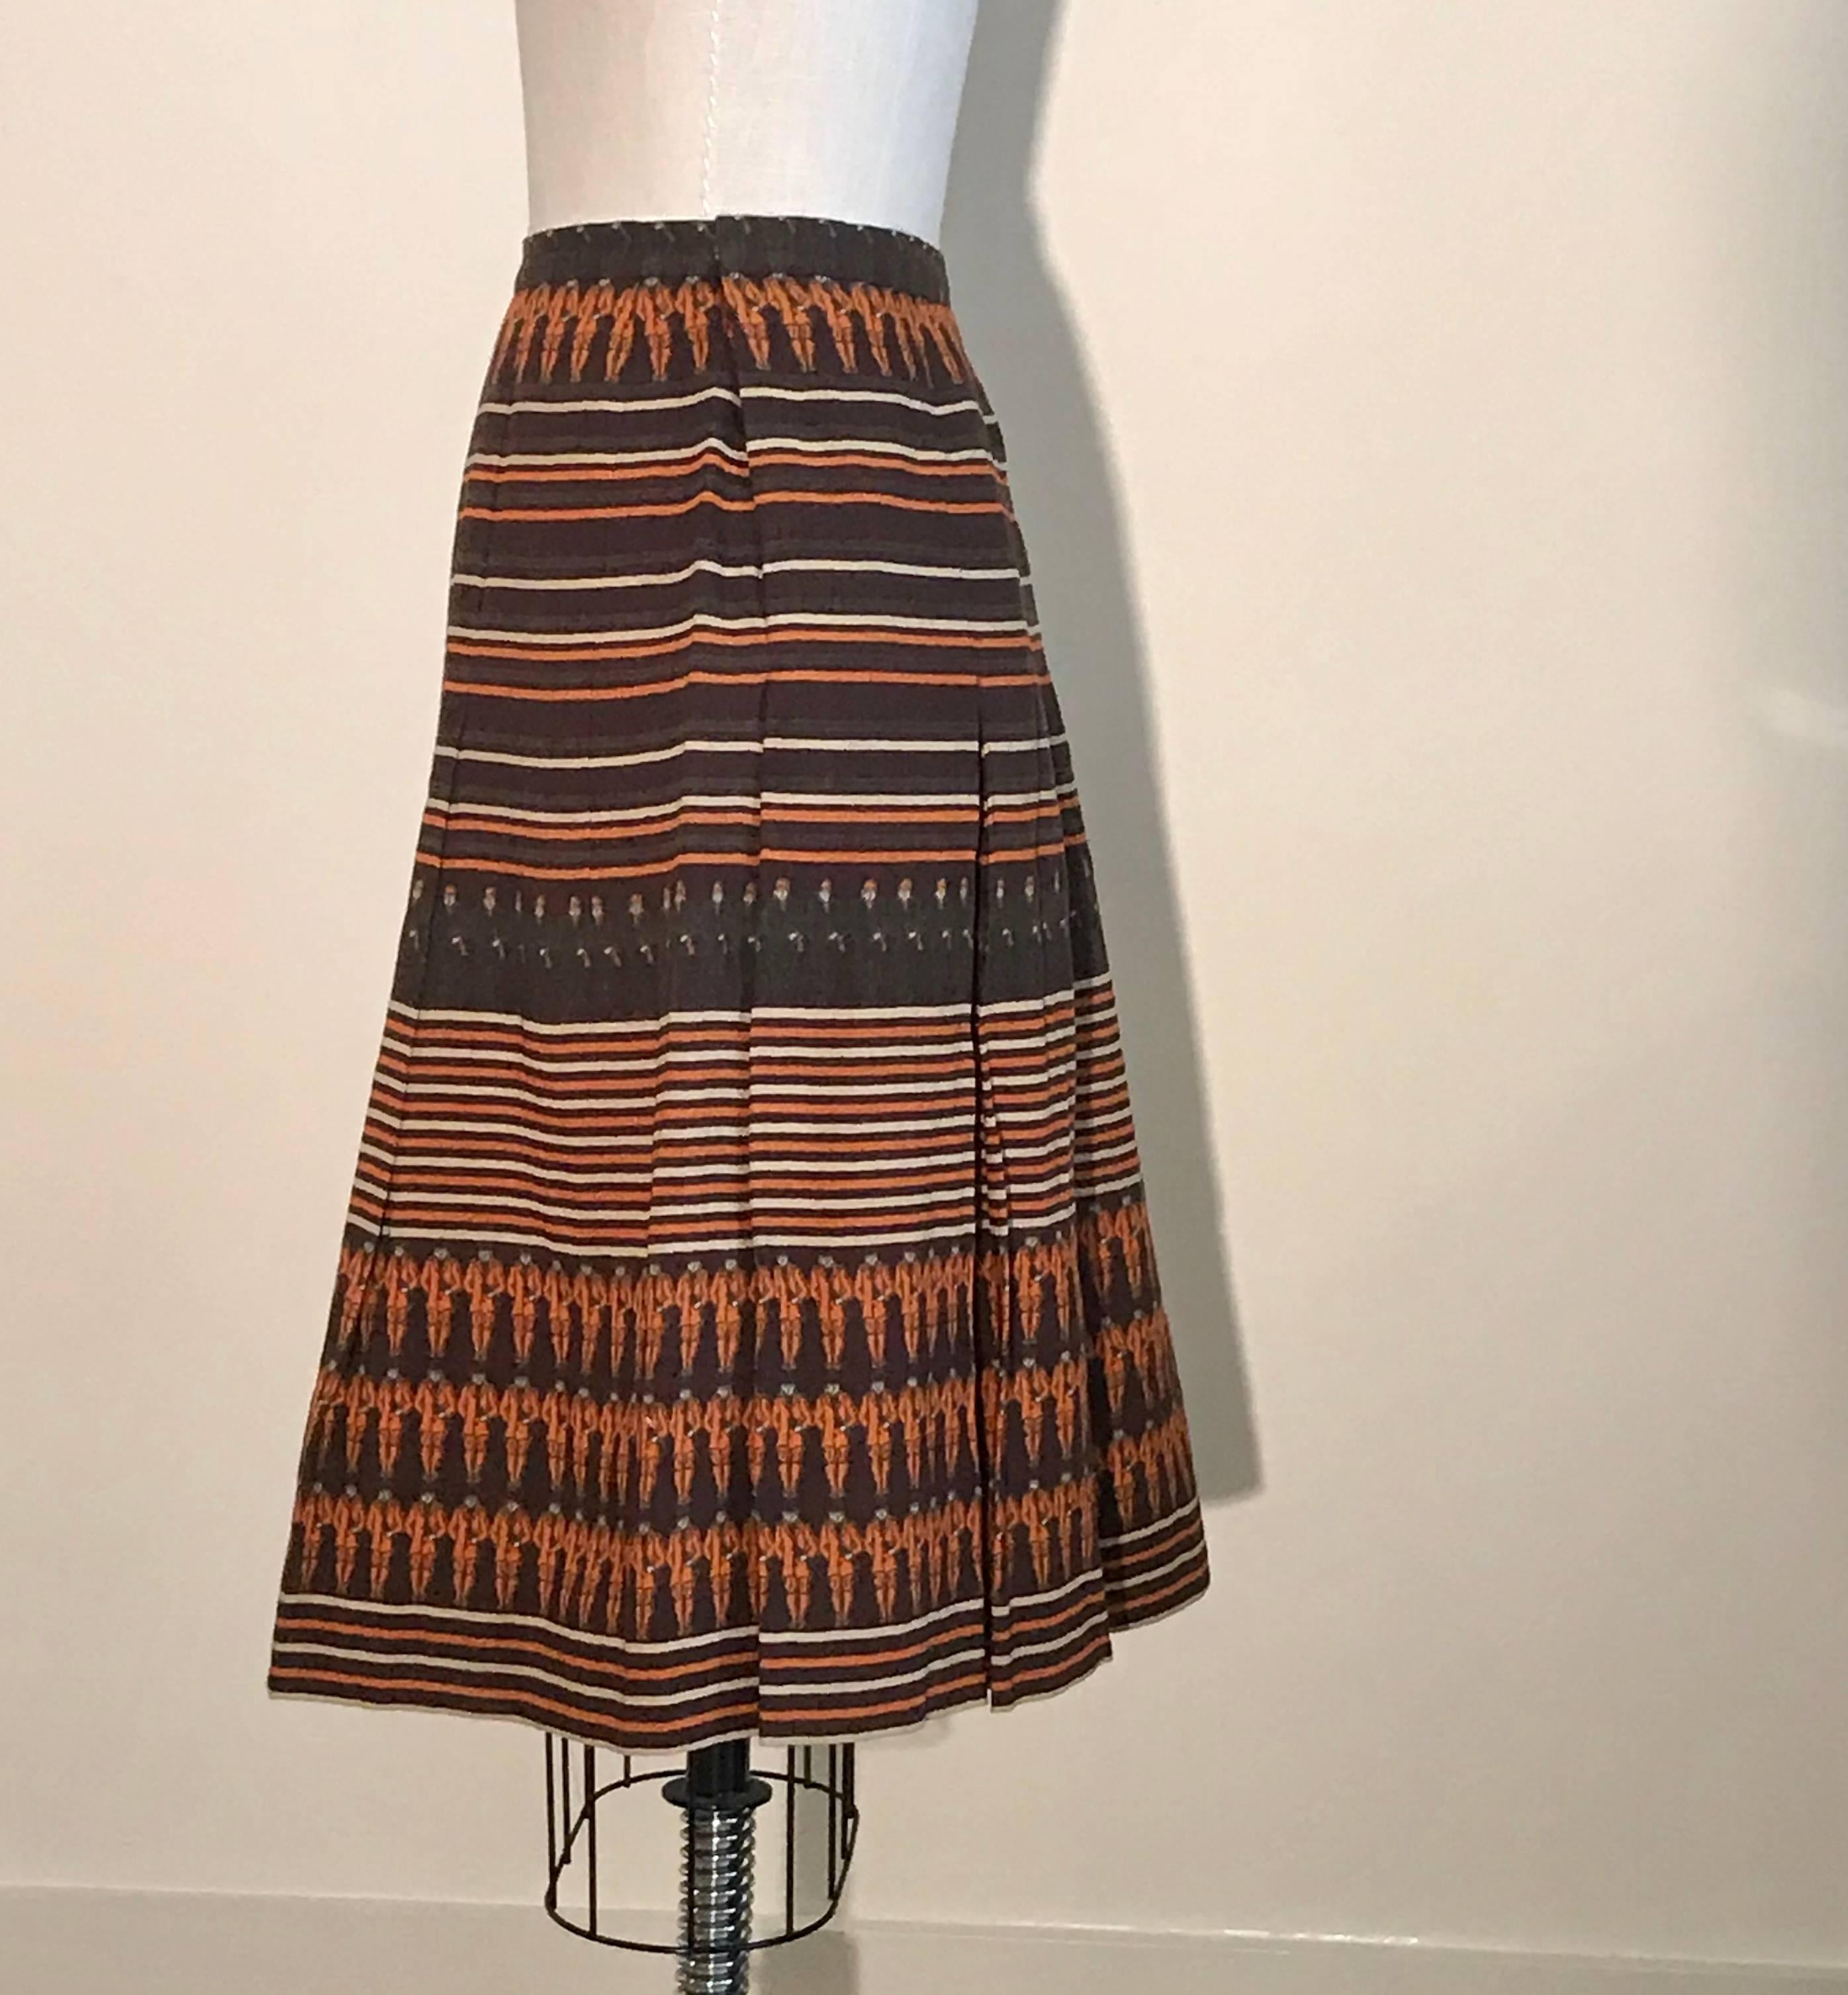 Amazing Gucci vintage 1970s wool blend pleated skirt featuring stripes and orange and green equestrian jockey print. Fastens with snaps at side and two hook and eyes. Gucci logo print lining. 

85% wool, 15% polyamide. 

Made in Italy.

Size IT 46,